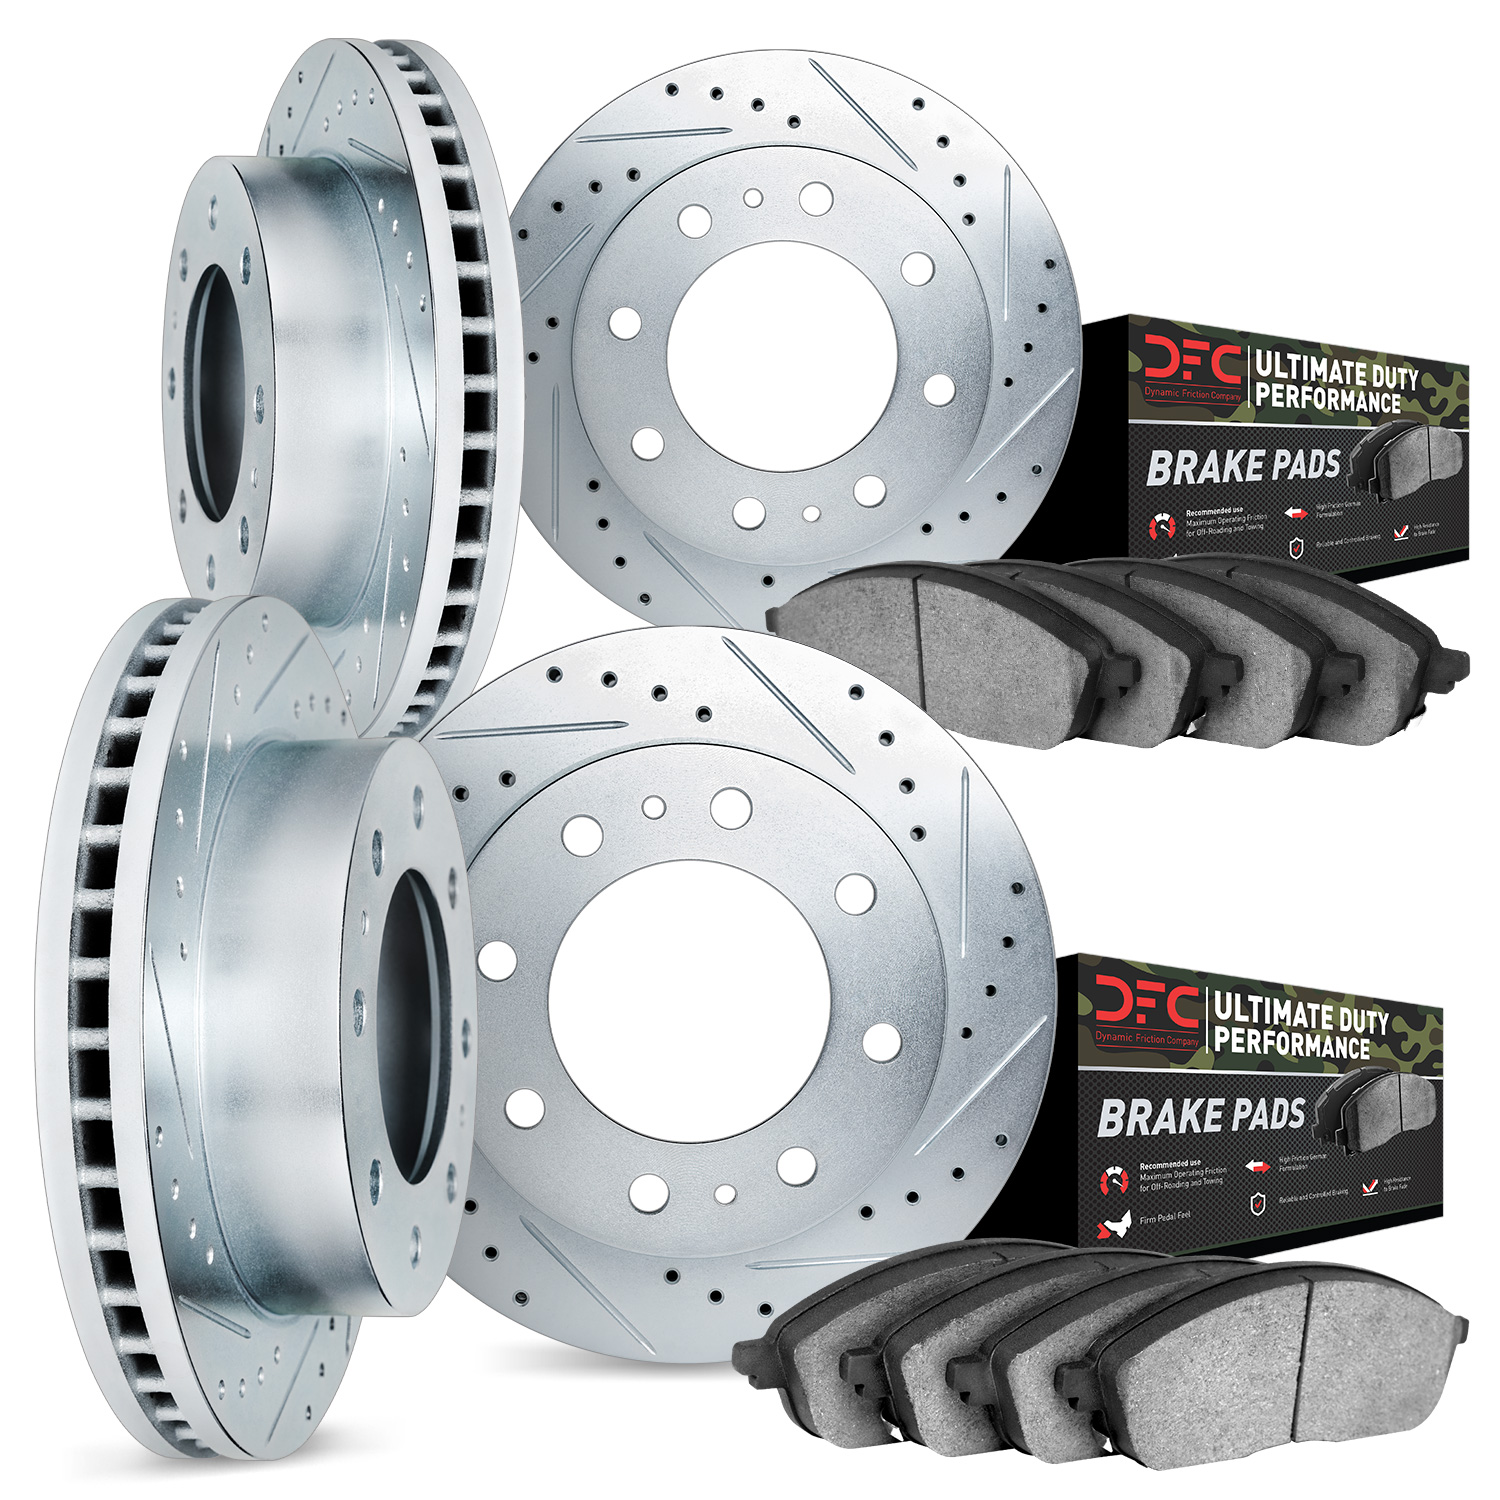 7404-54020 Drilled/Slotted Brake Rotors with Ultimate-Duty Brake Pads Kit [Silver], 1999-2002 Ford/Lincoln/Mercury/Mazda, Positi